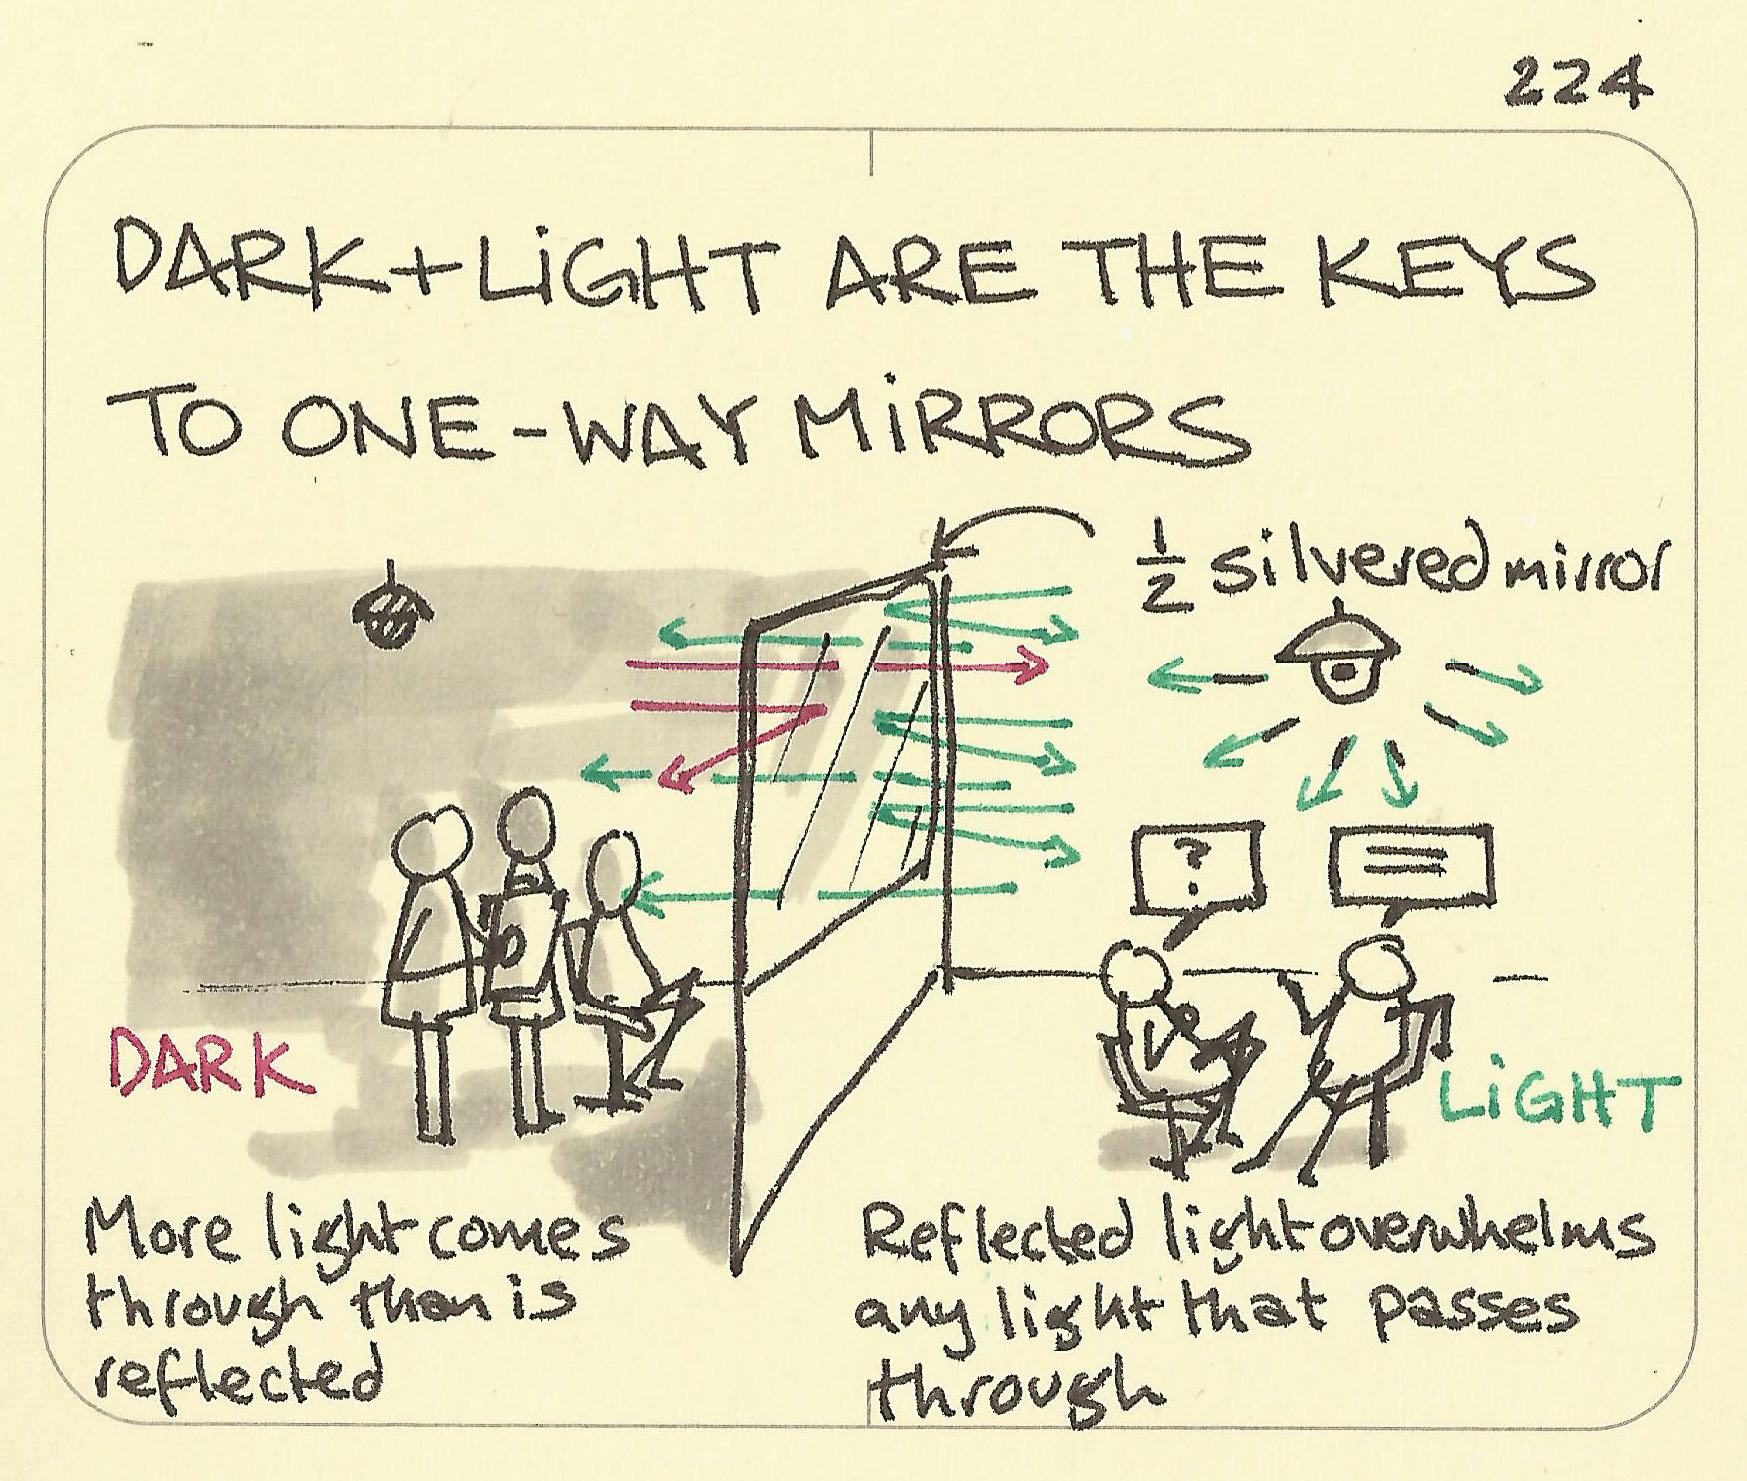 Dark and light are the keys to one-way mirrors - Sketchplanations